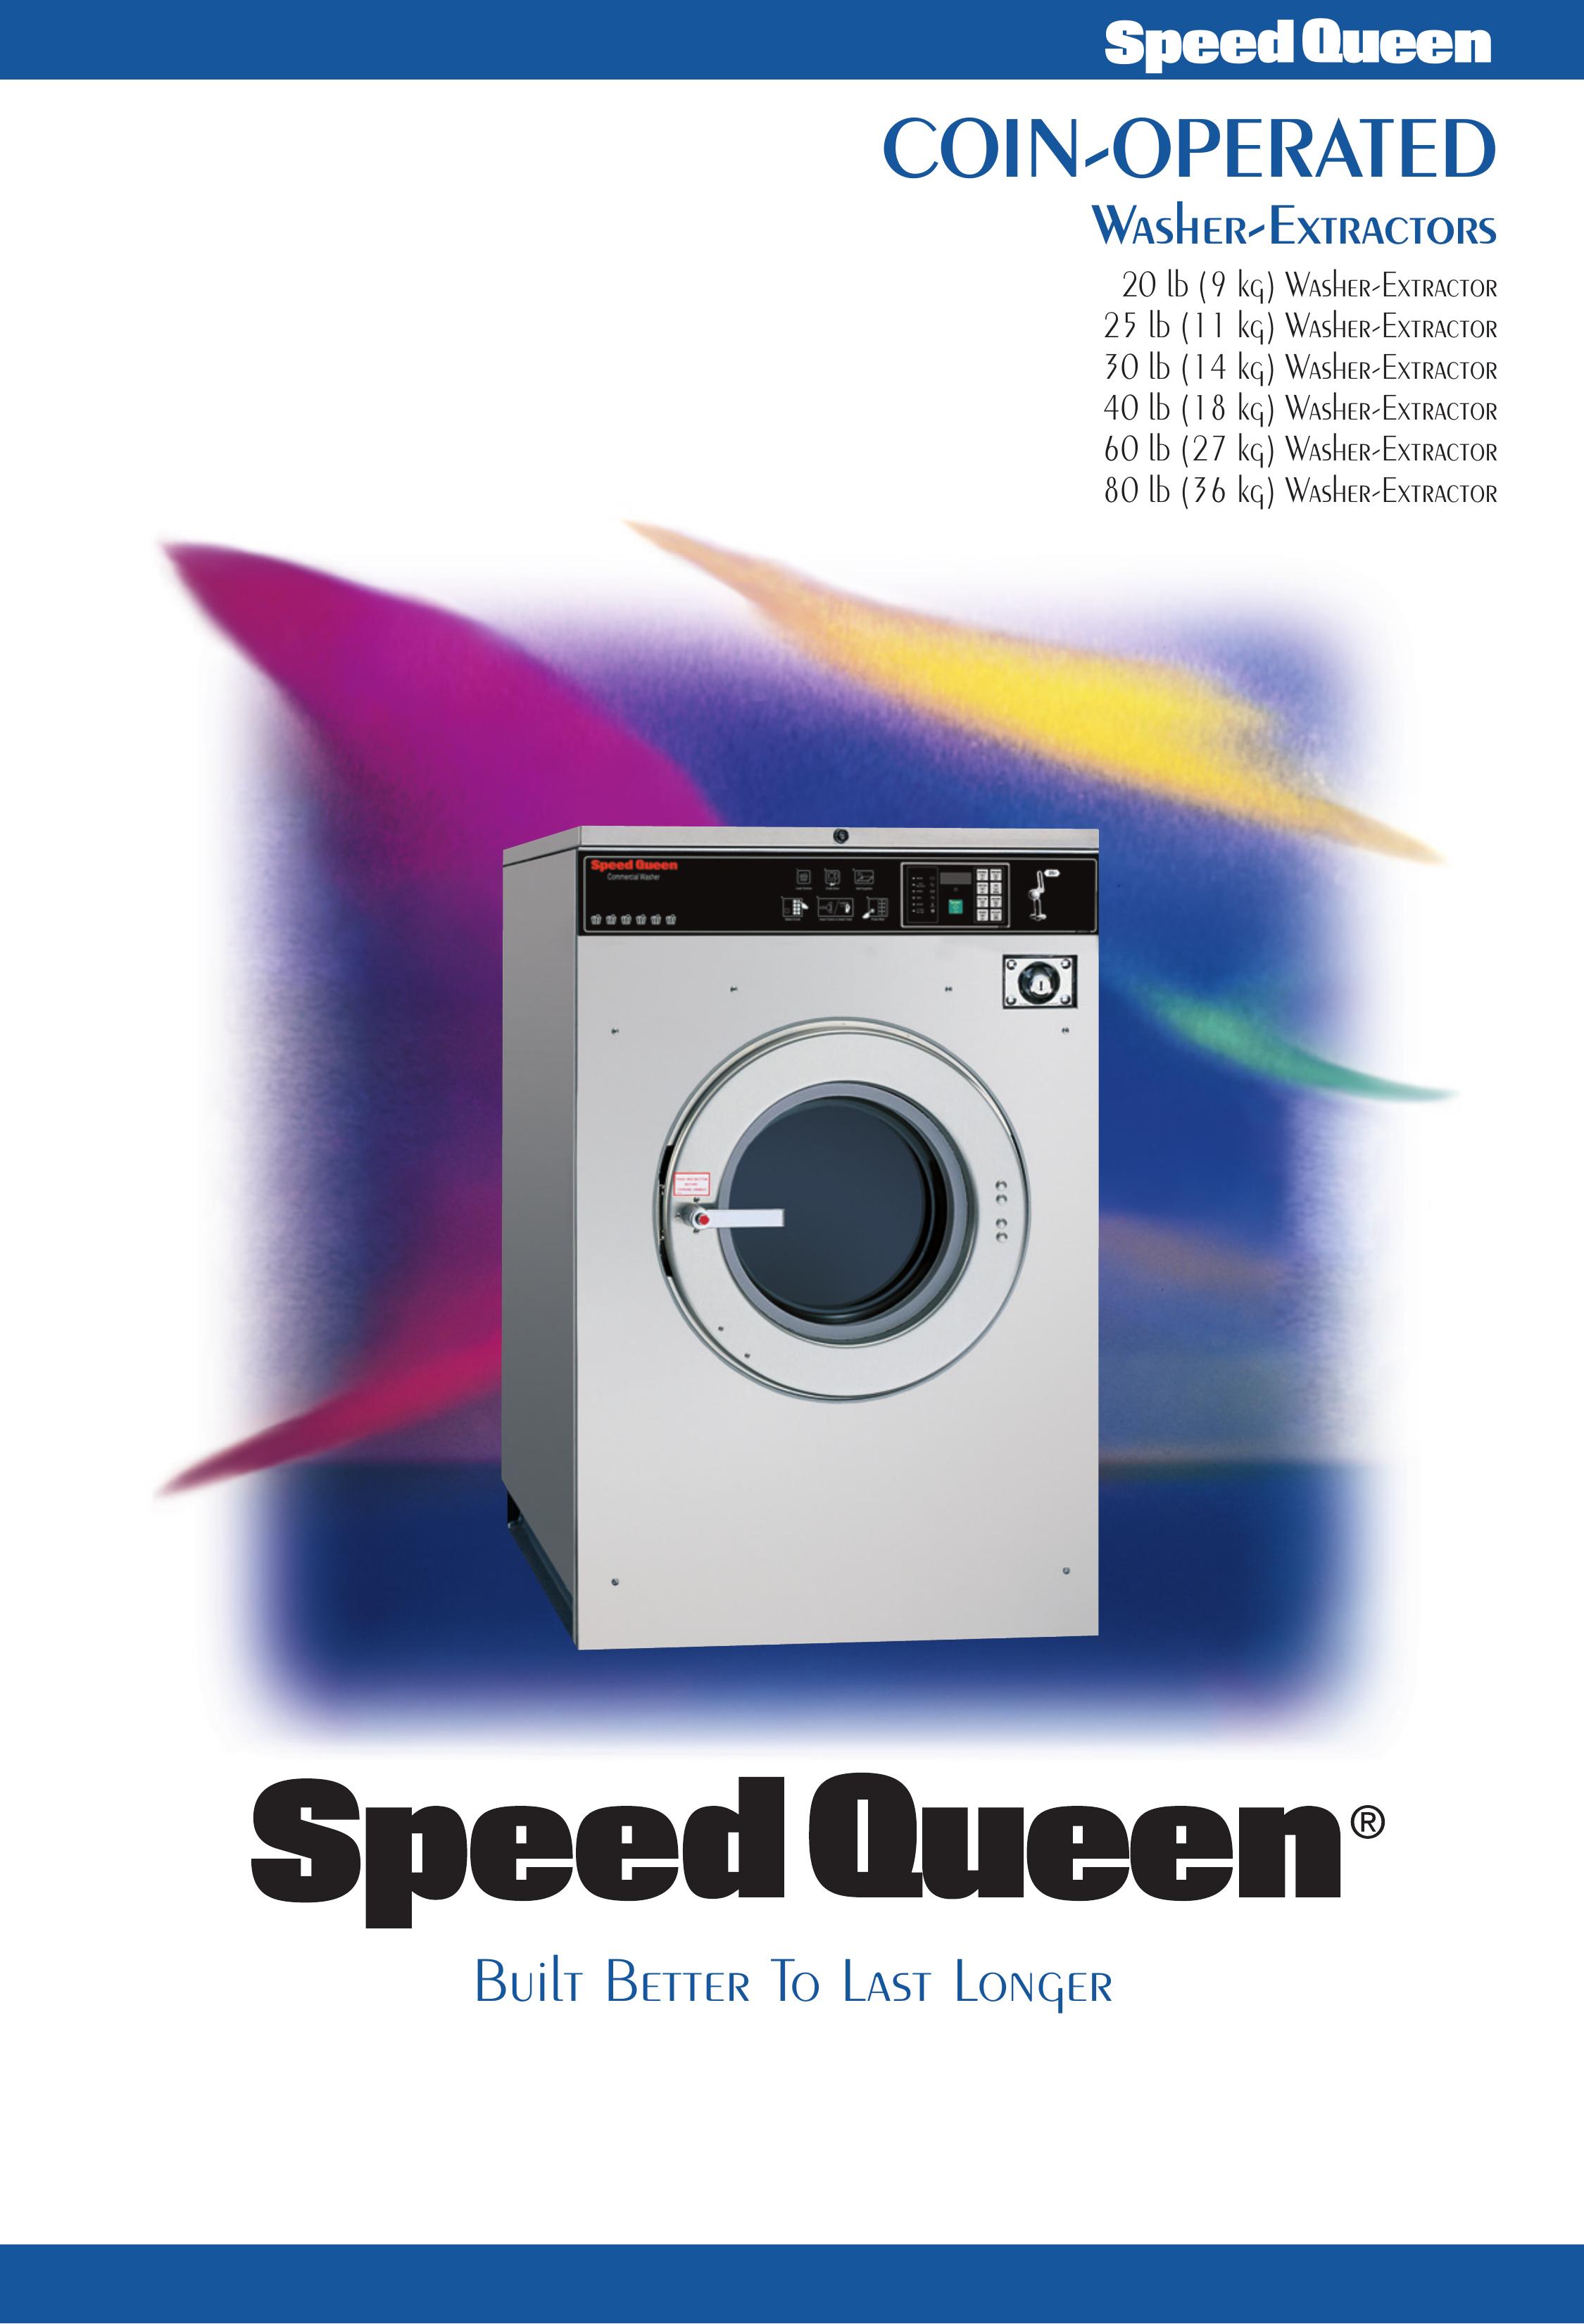 Speed Queen 30 lb Washer User Manual